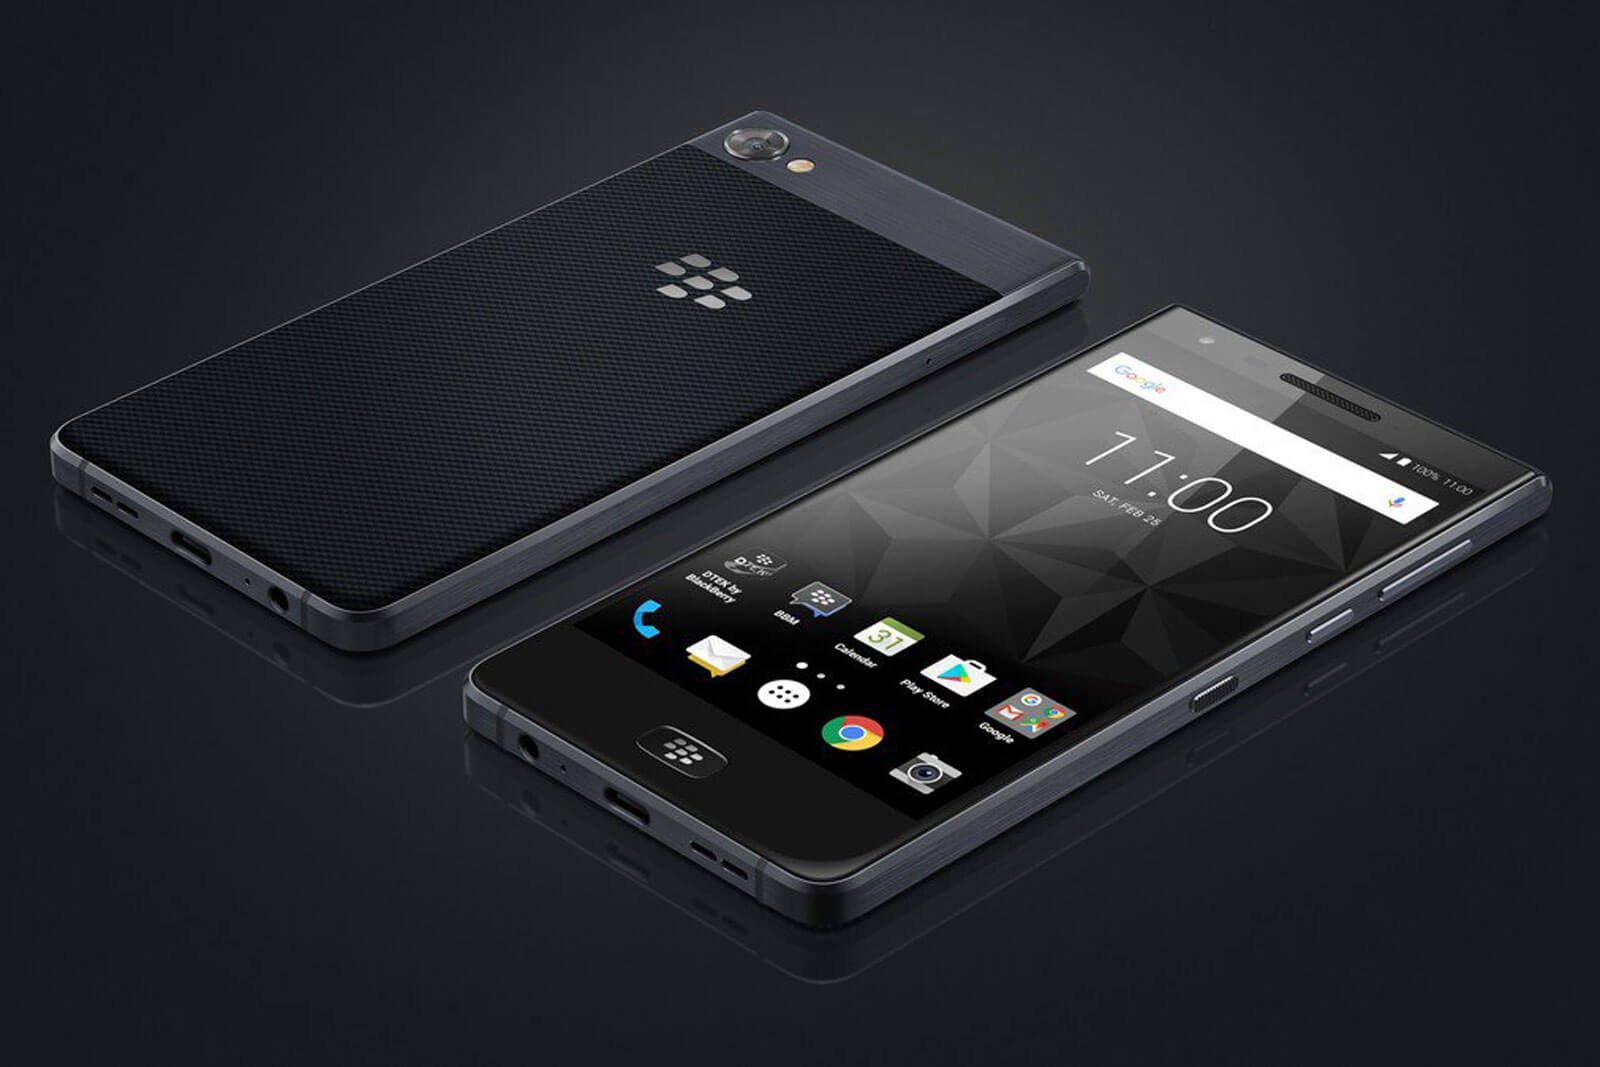 BlackBerry's new Motion smartphone launches with no keyboard and a 4000mAh battery